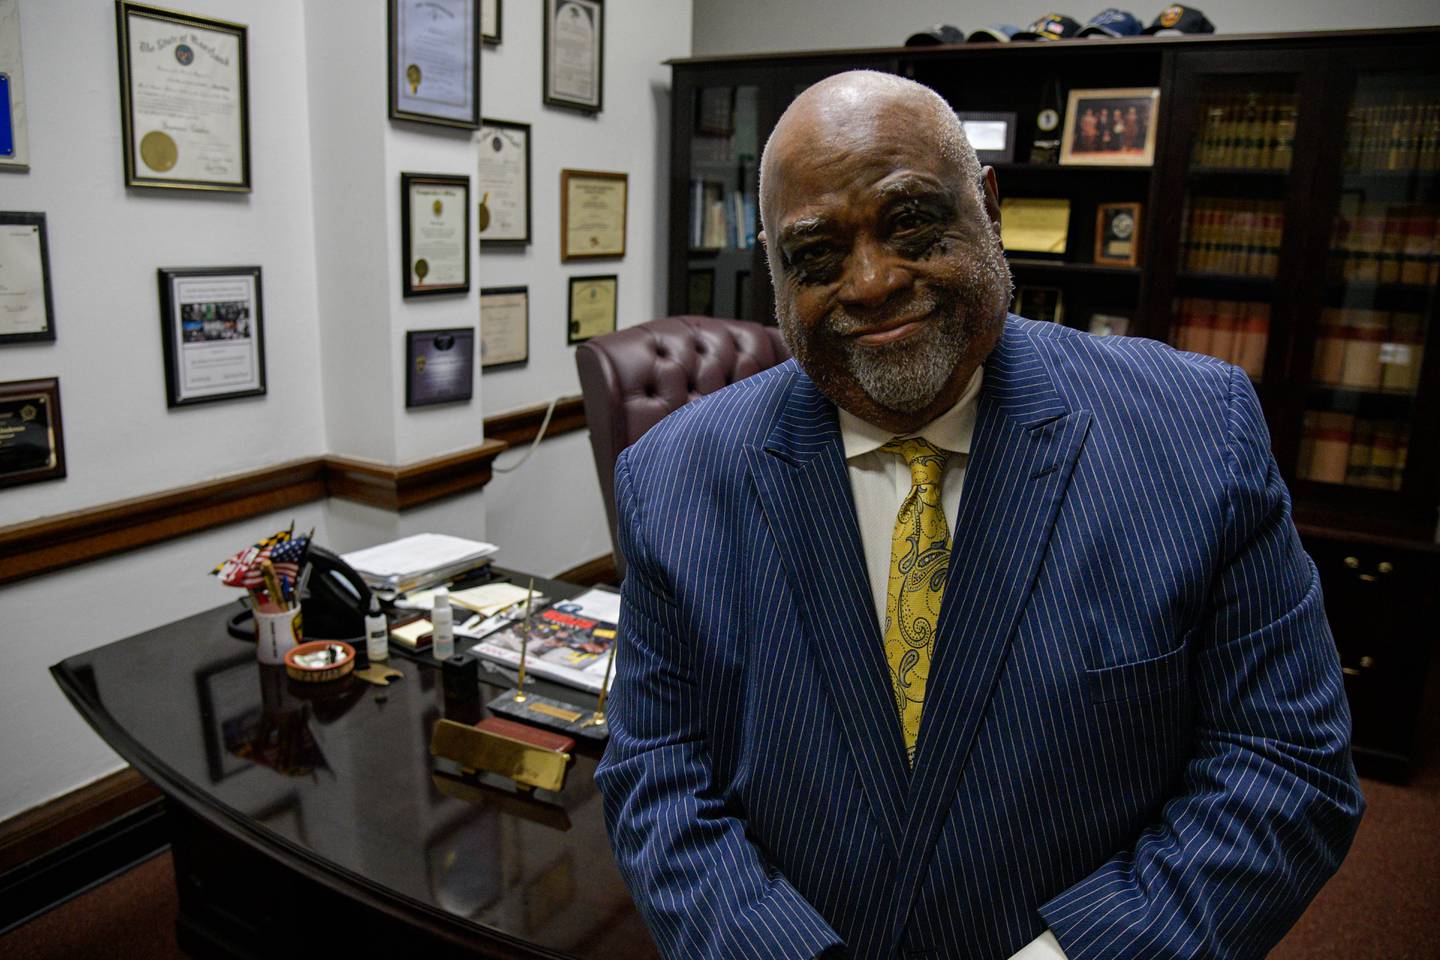 Baltimore City Sheriff John W. Anderson stands for a portrait in his office on Thursday, May 26.